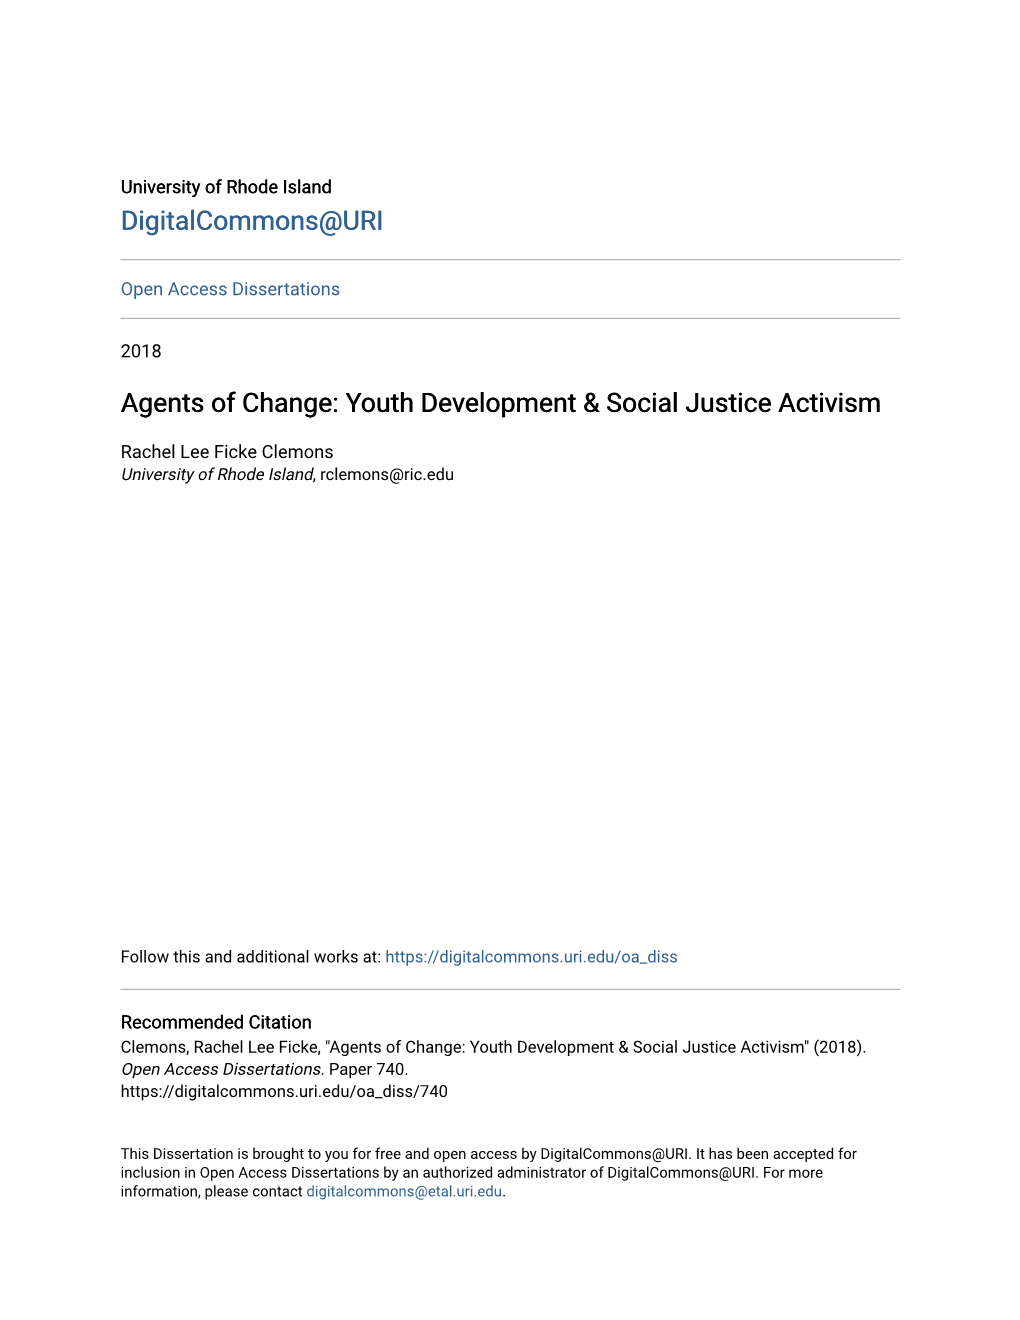 Youth Development & Social Justice Activism